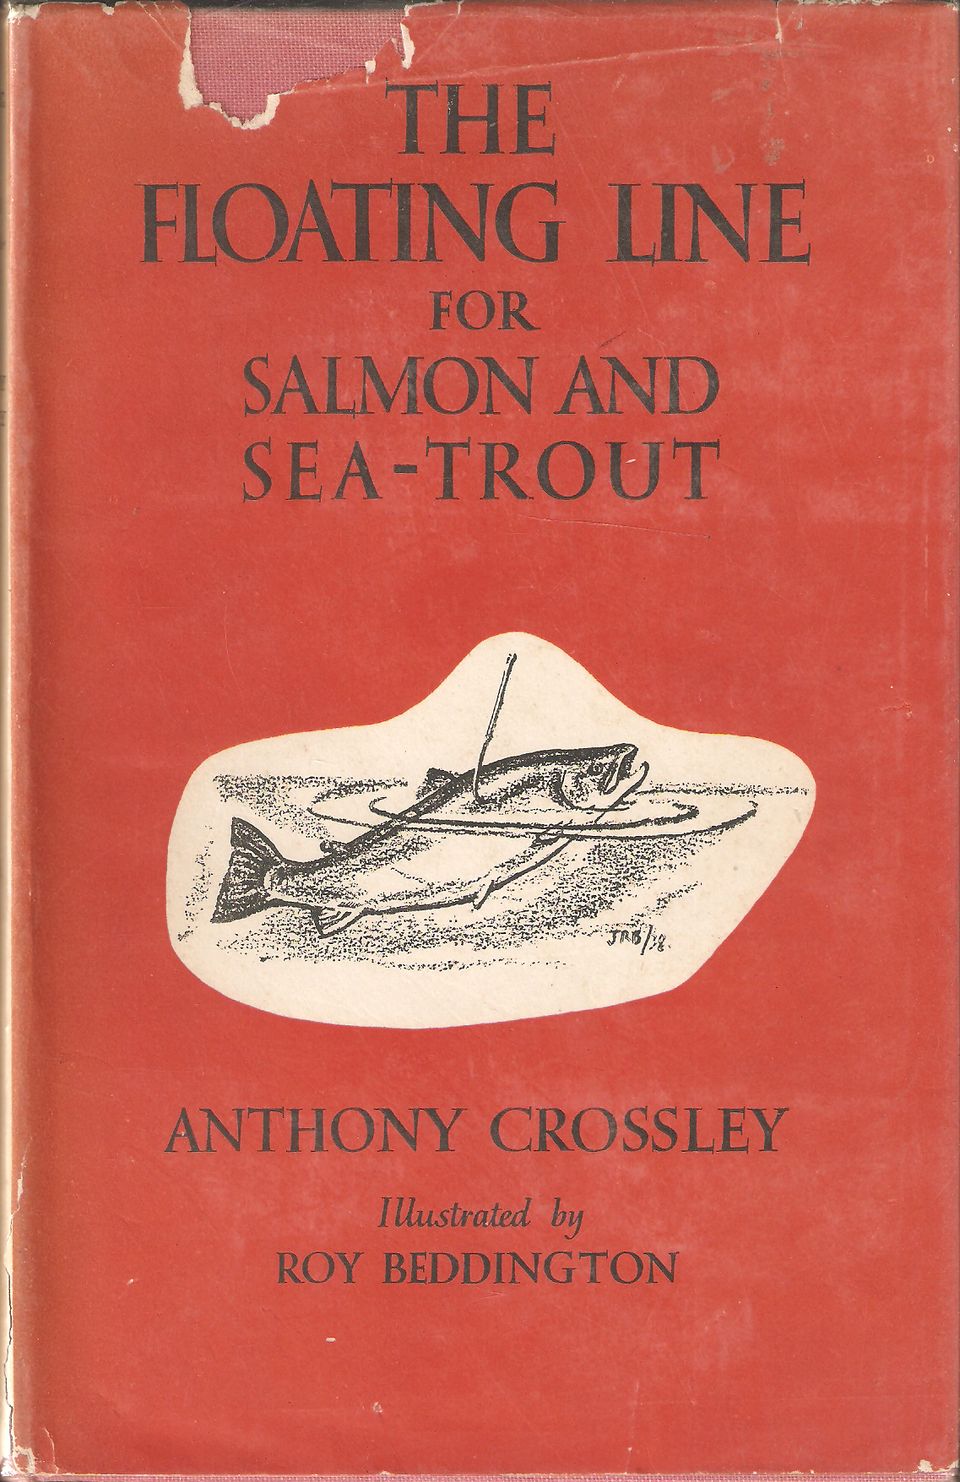 THE FLOATING LINE FOR SALMON AND SEA-TROUT. By Anthony Crossley. With a  chapter on dry fly fishing for salmon by John Rennie, correspondence  between the late A.H. Wood of Cairnton and other